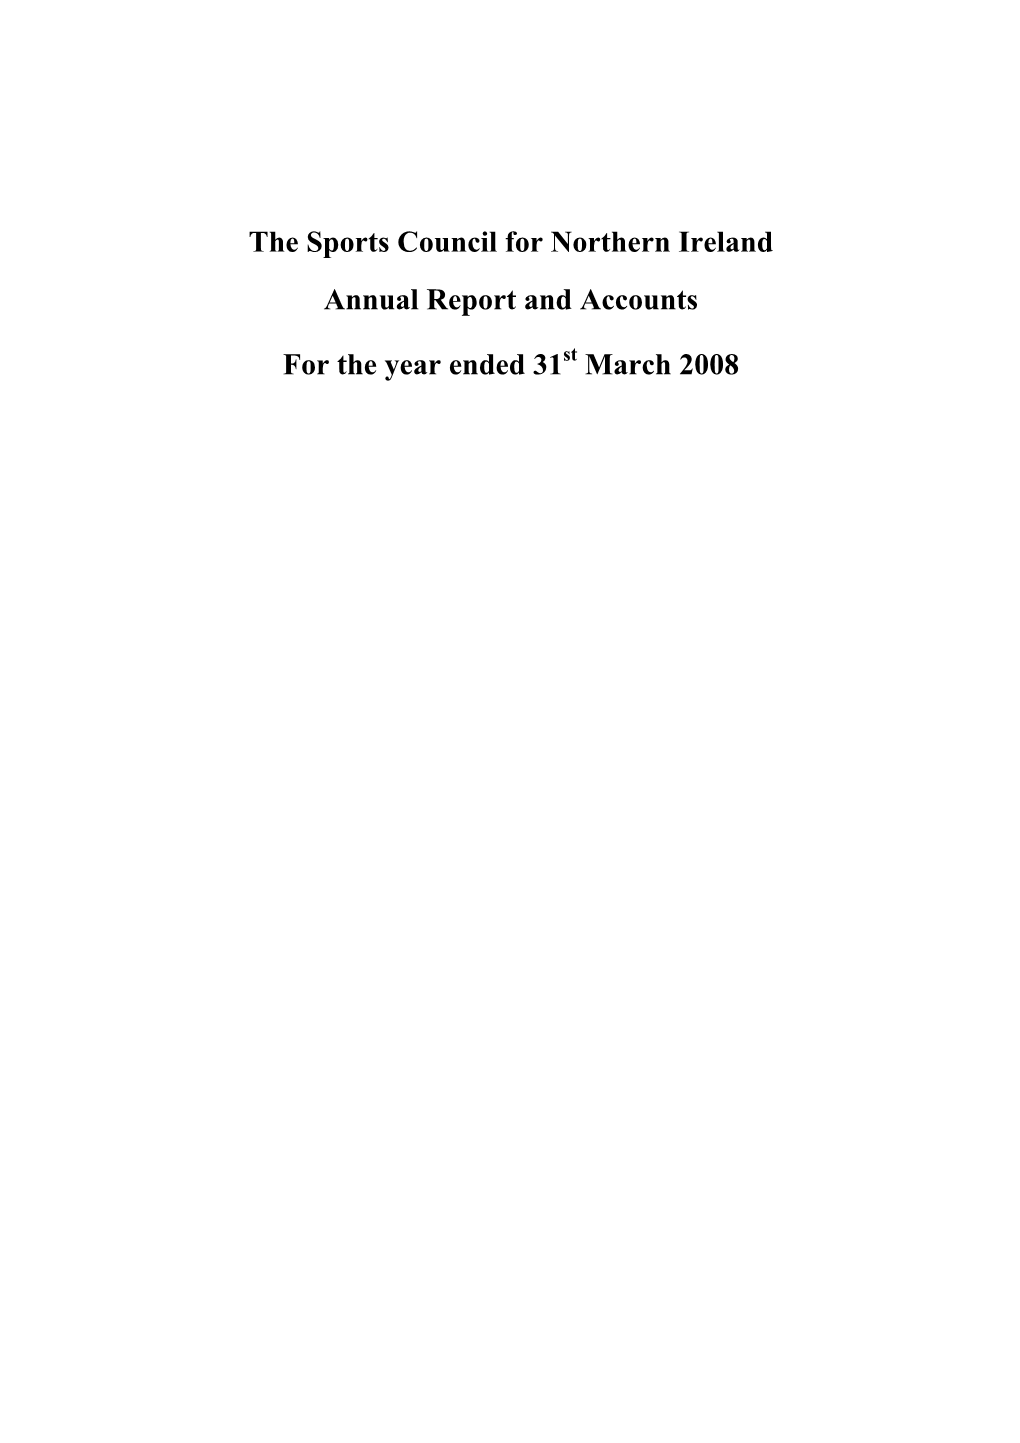 The Sports Council for Northern Ireland Annual Report and Accounts for the Year Ended 31St March 2008